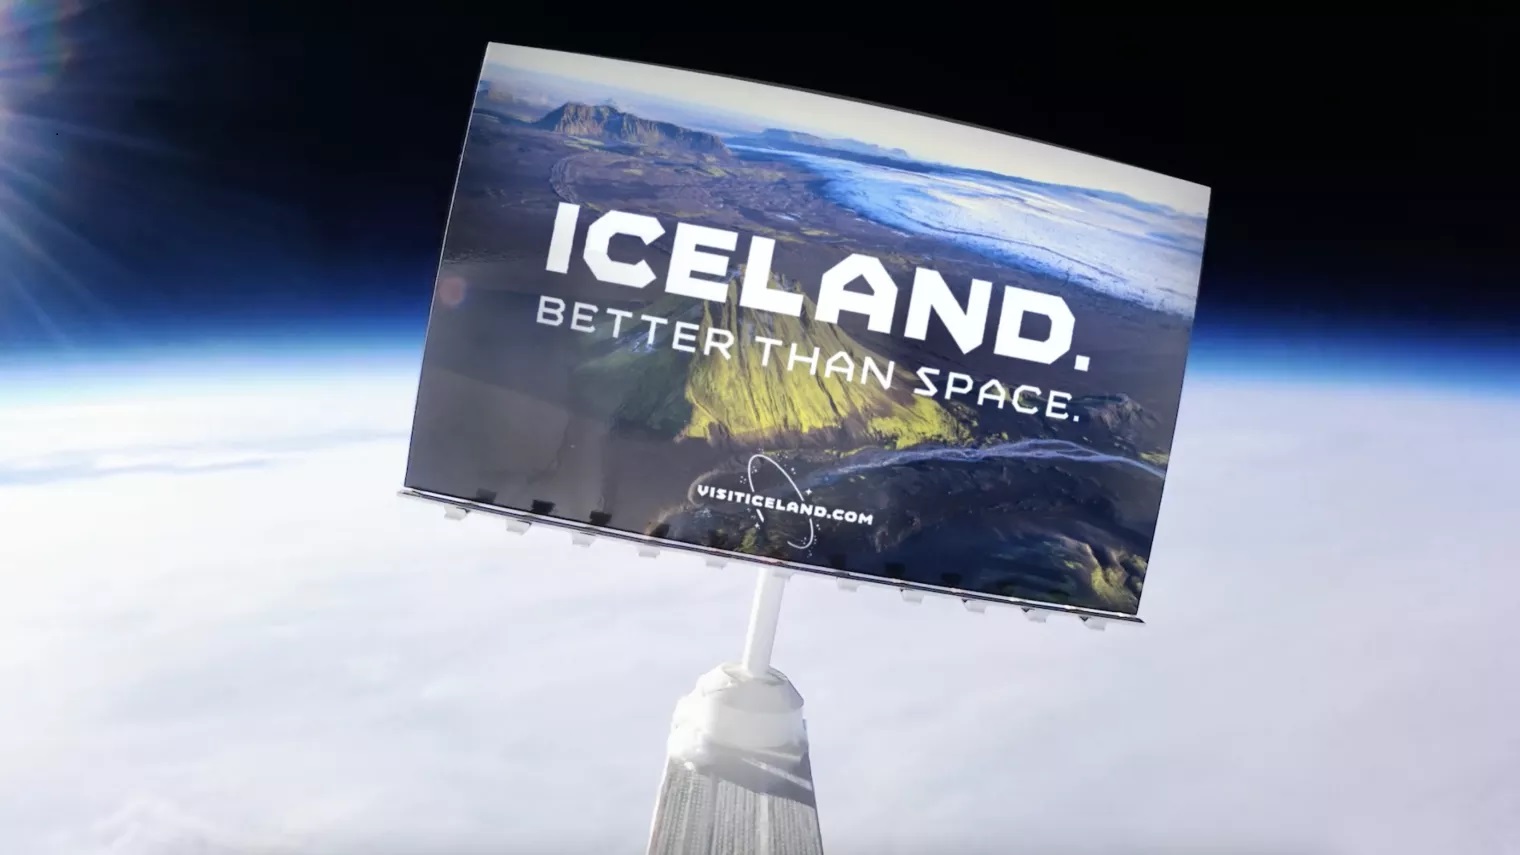 Mission Iceland：比太空更好